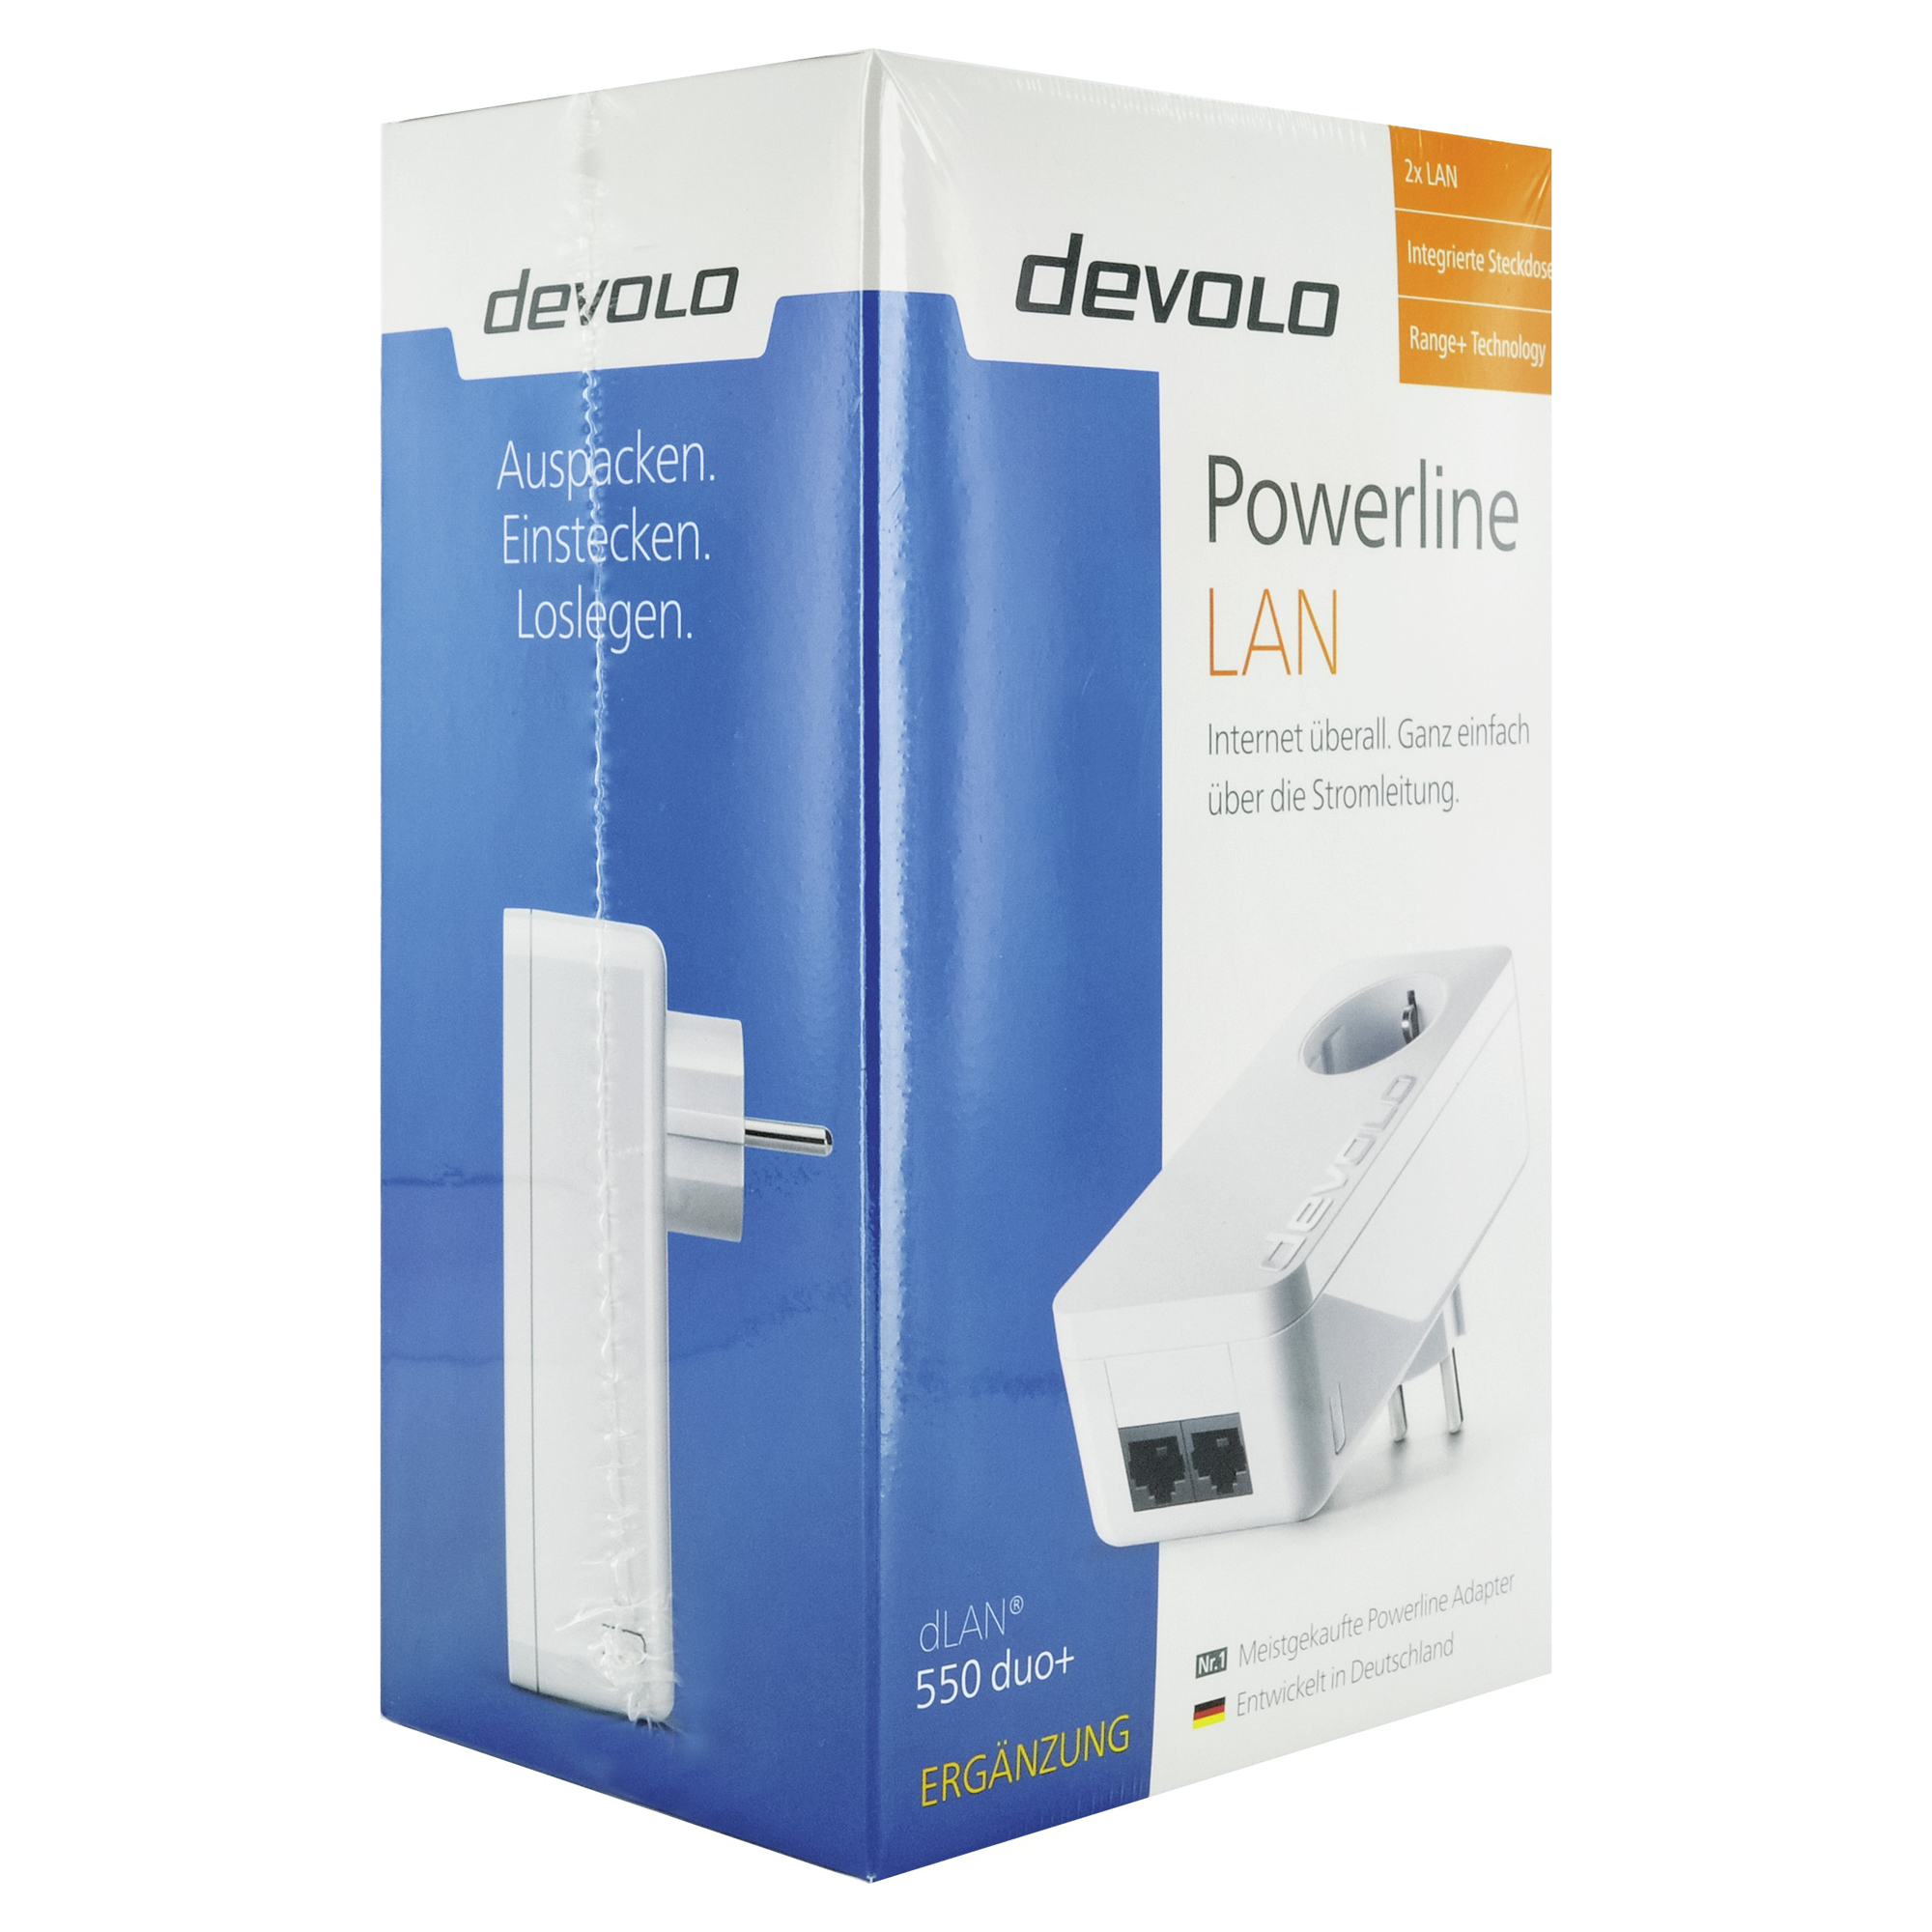 Powerline-Adapter dLAN 550 duo+ + product picture